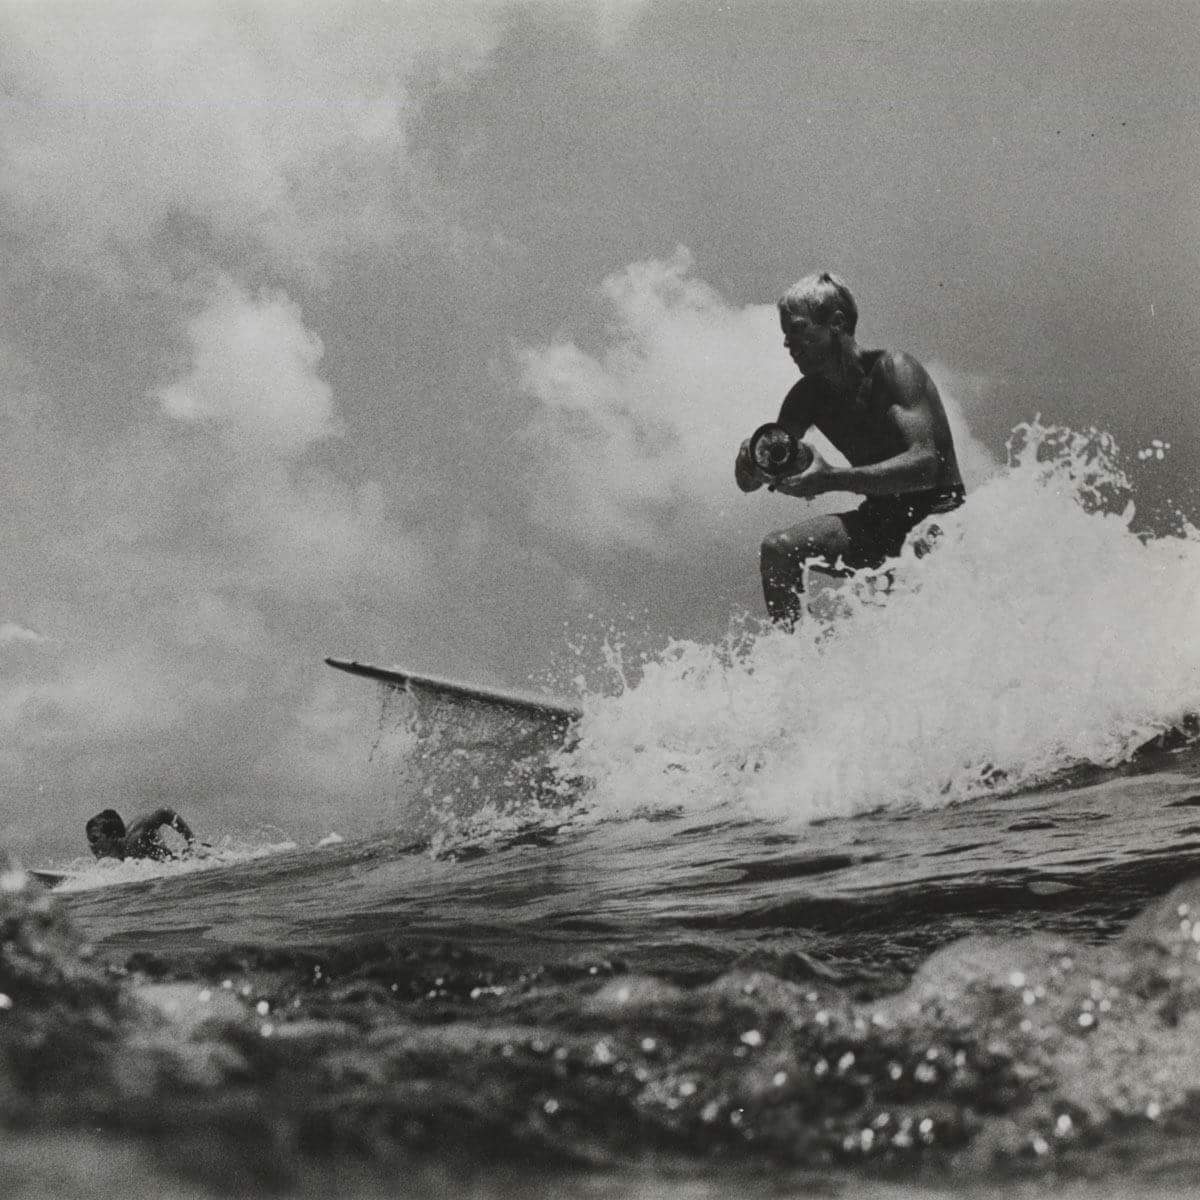 Brown got his filmmaking start while stationed in Hawaii during a stint when he was employed with the Navy. While there, he filmed other surfers with an 8mm camera.